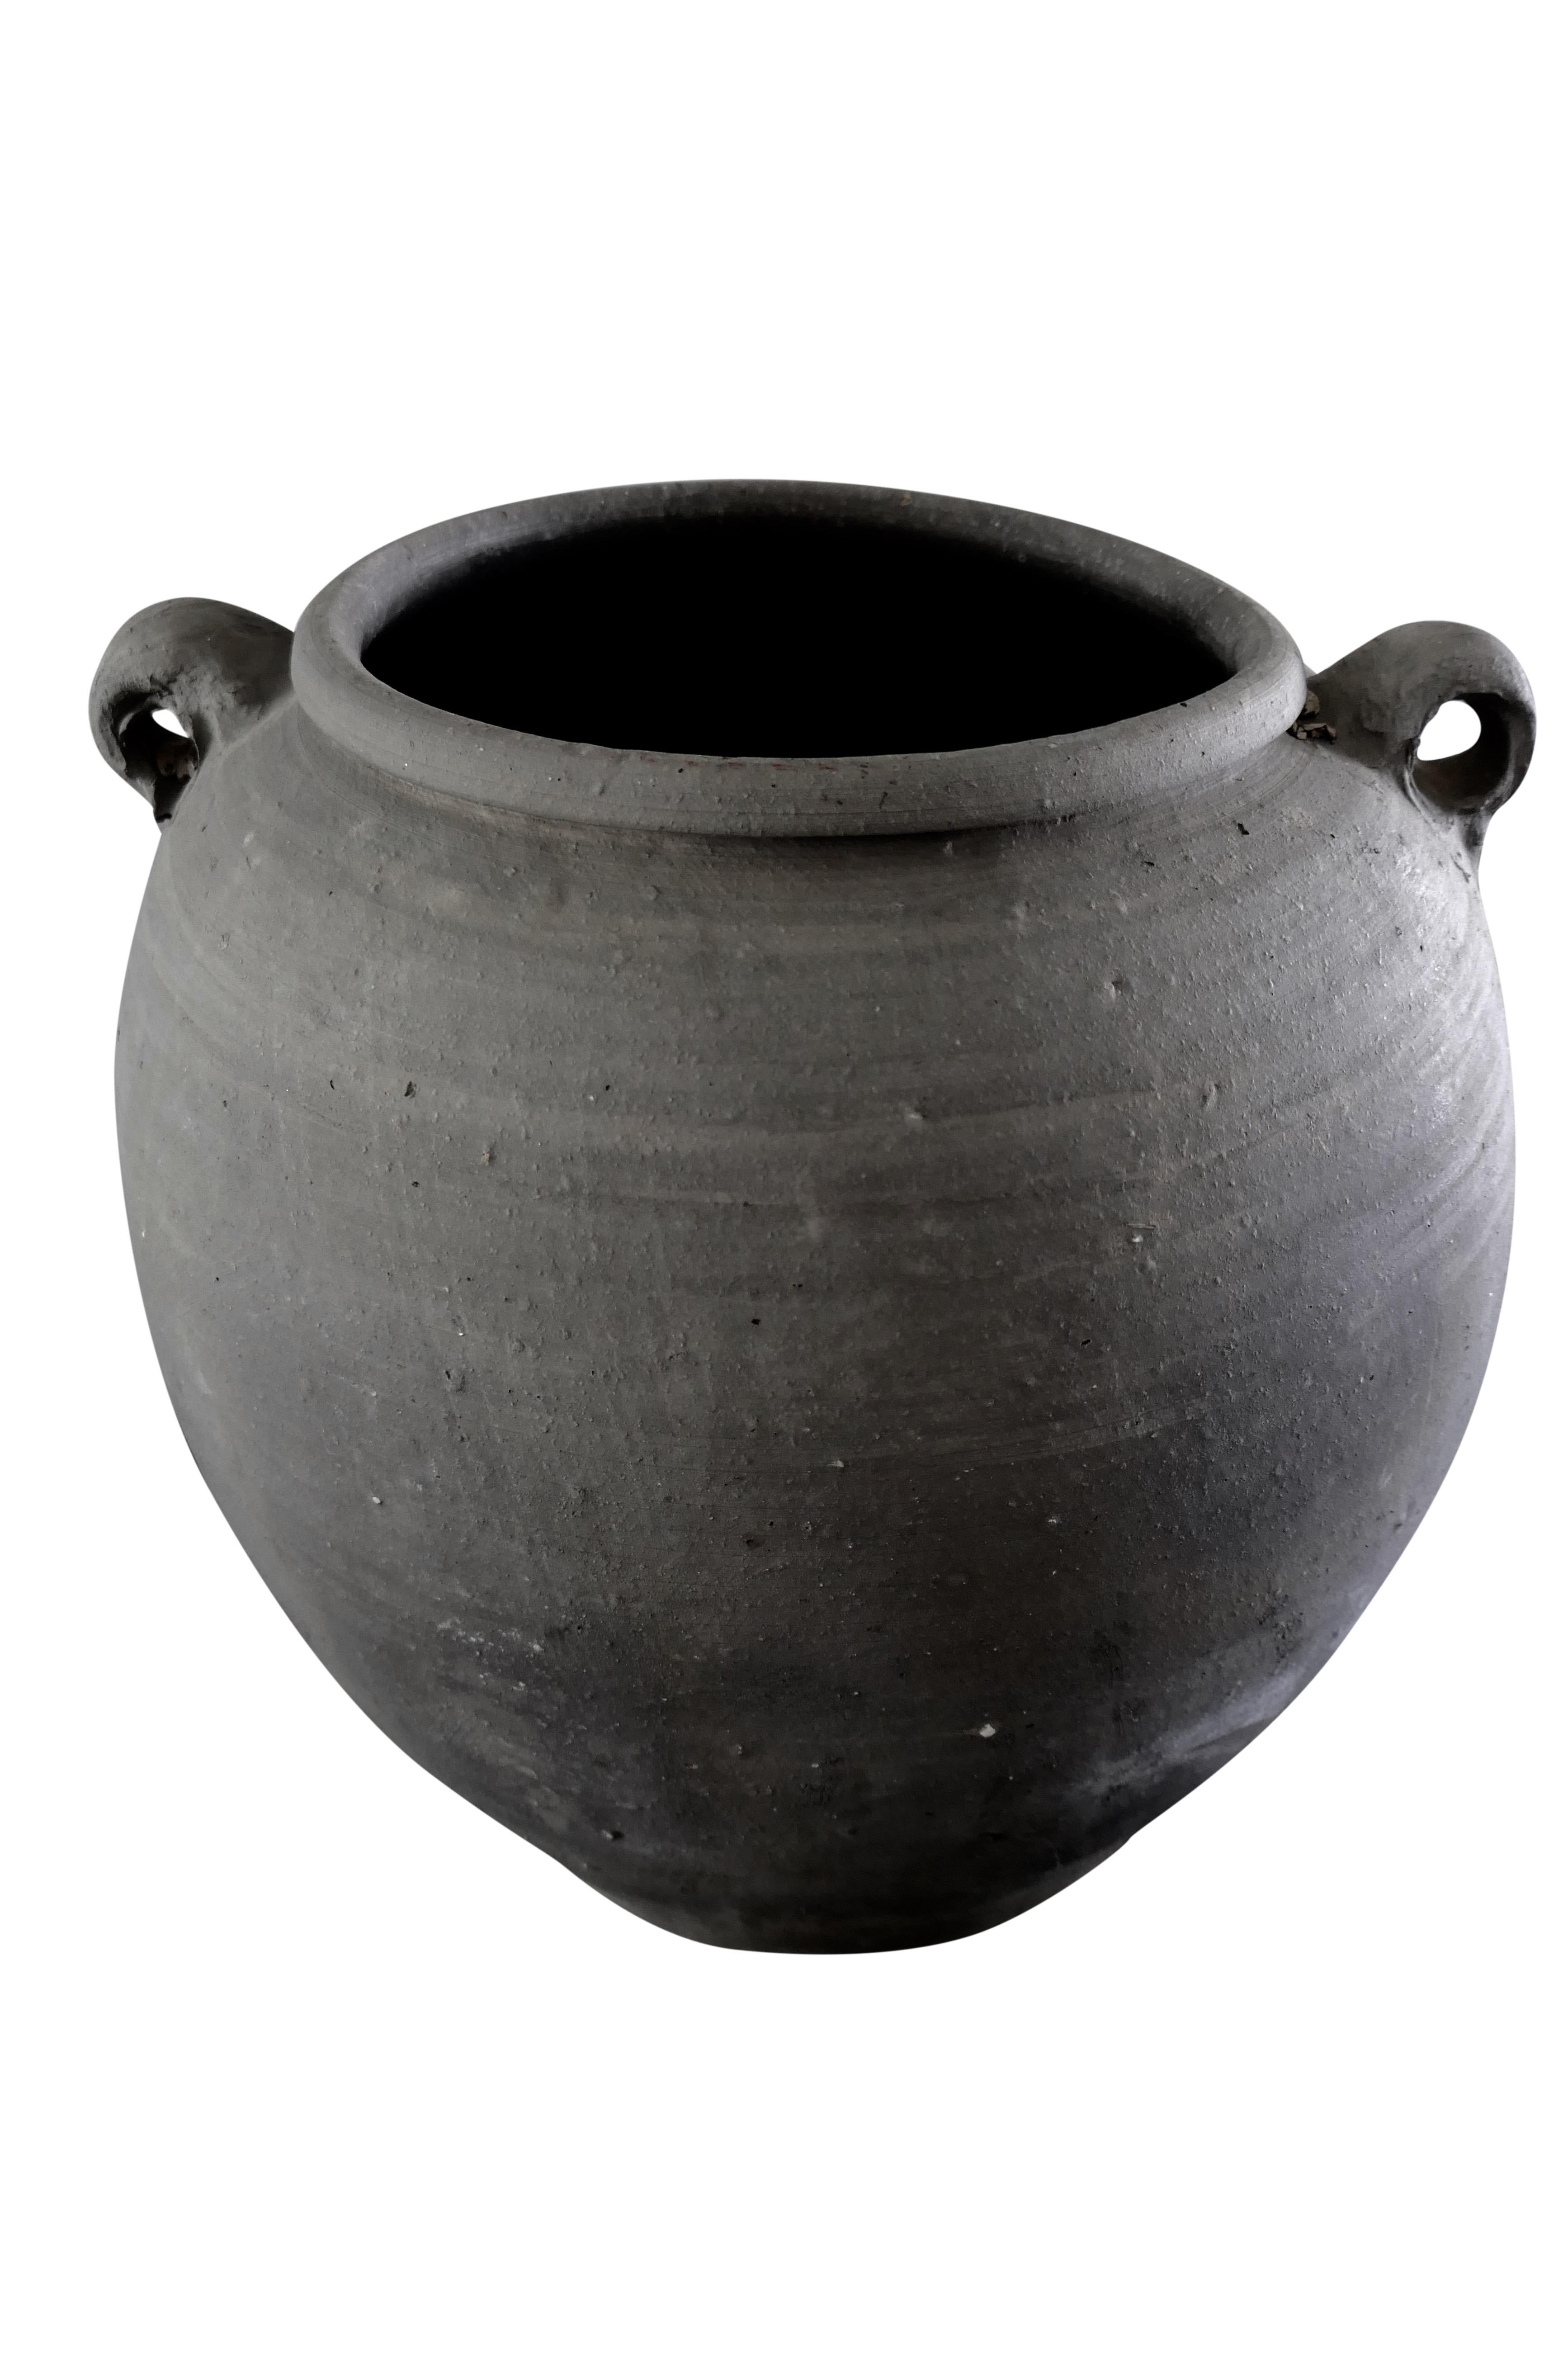 Vintage Asian one-of-a-kind handcrafted clay vessel/vase. Rustic smooth unglazed matte finish in beautiful natural tone's.